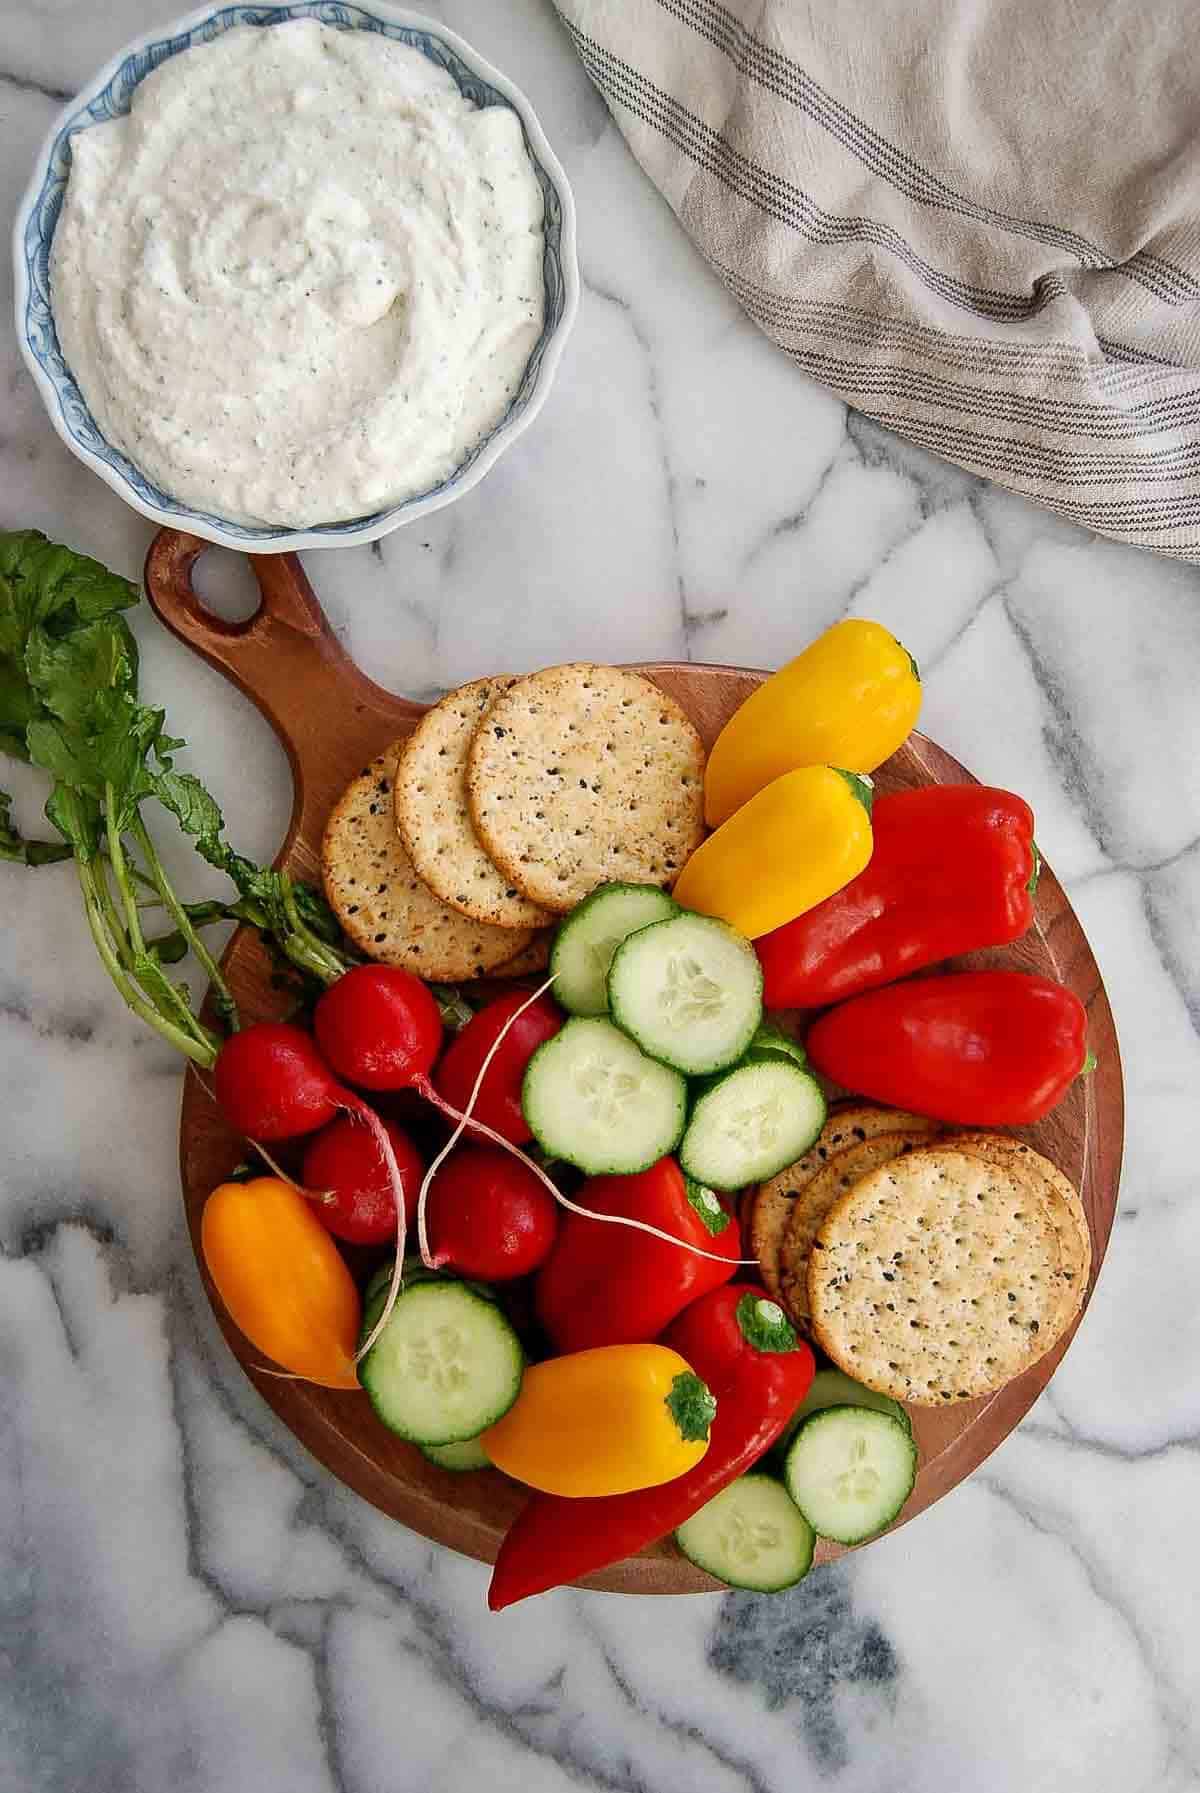 cottage cheese ranch dip with plate of veggies and crackers.